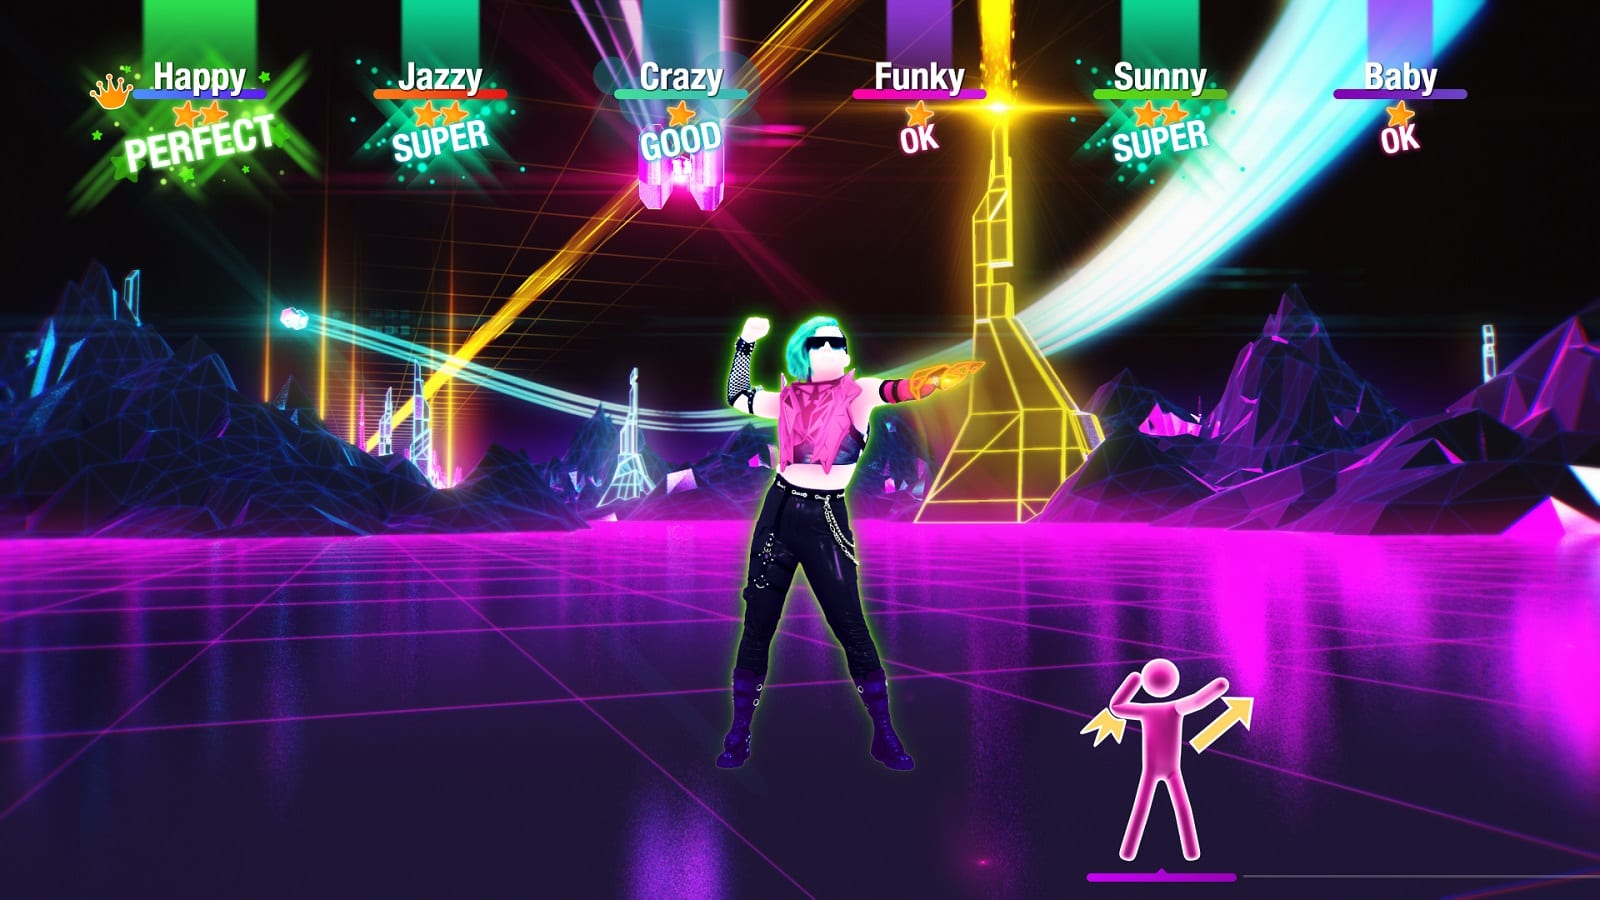 Just Dance 2019 Review: Another shimmy in the right direction